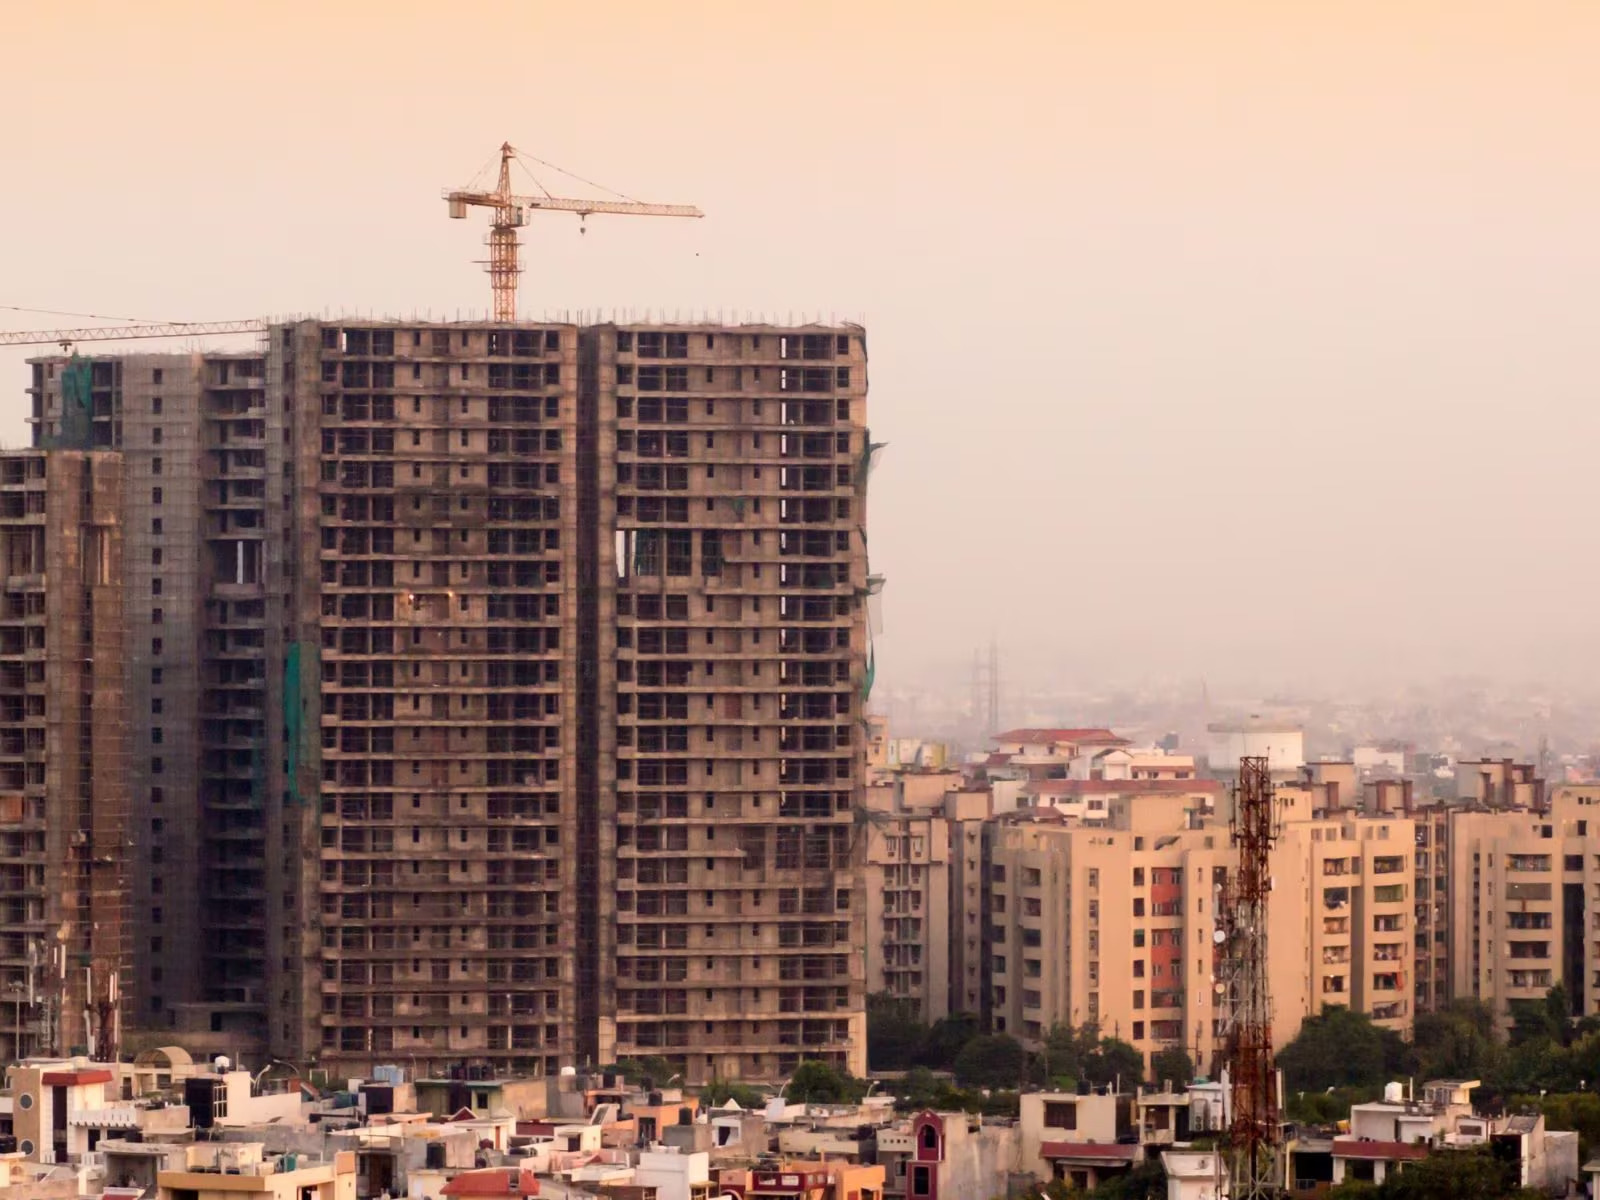 Luxury Real Estate Booms in Delhi-NCR Gurugram Leads Q1 Launches - Check Key Destinations